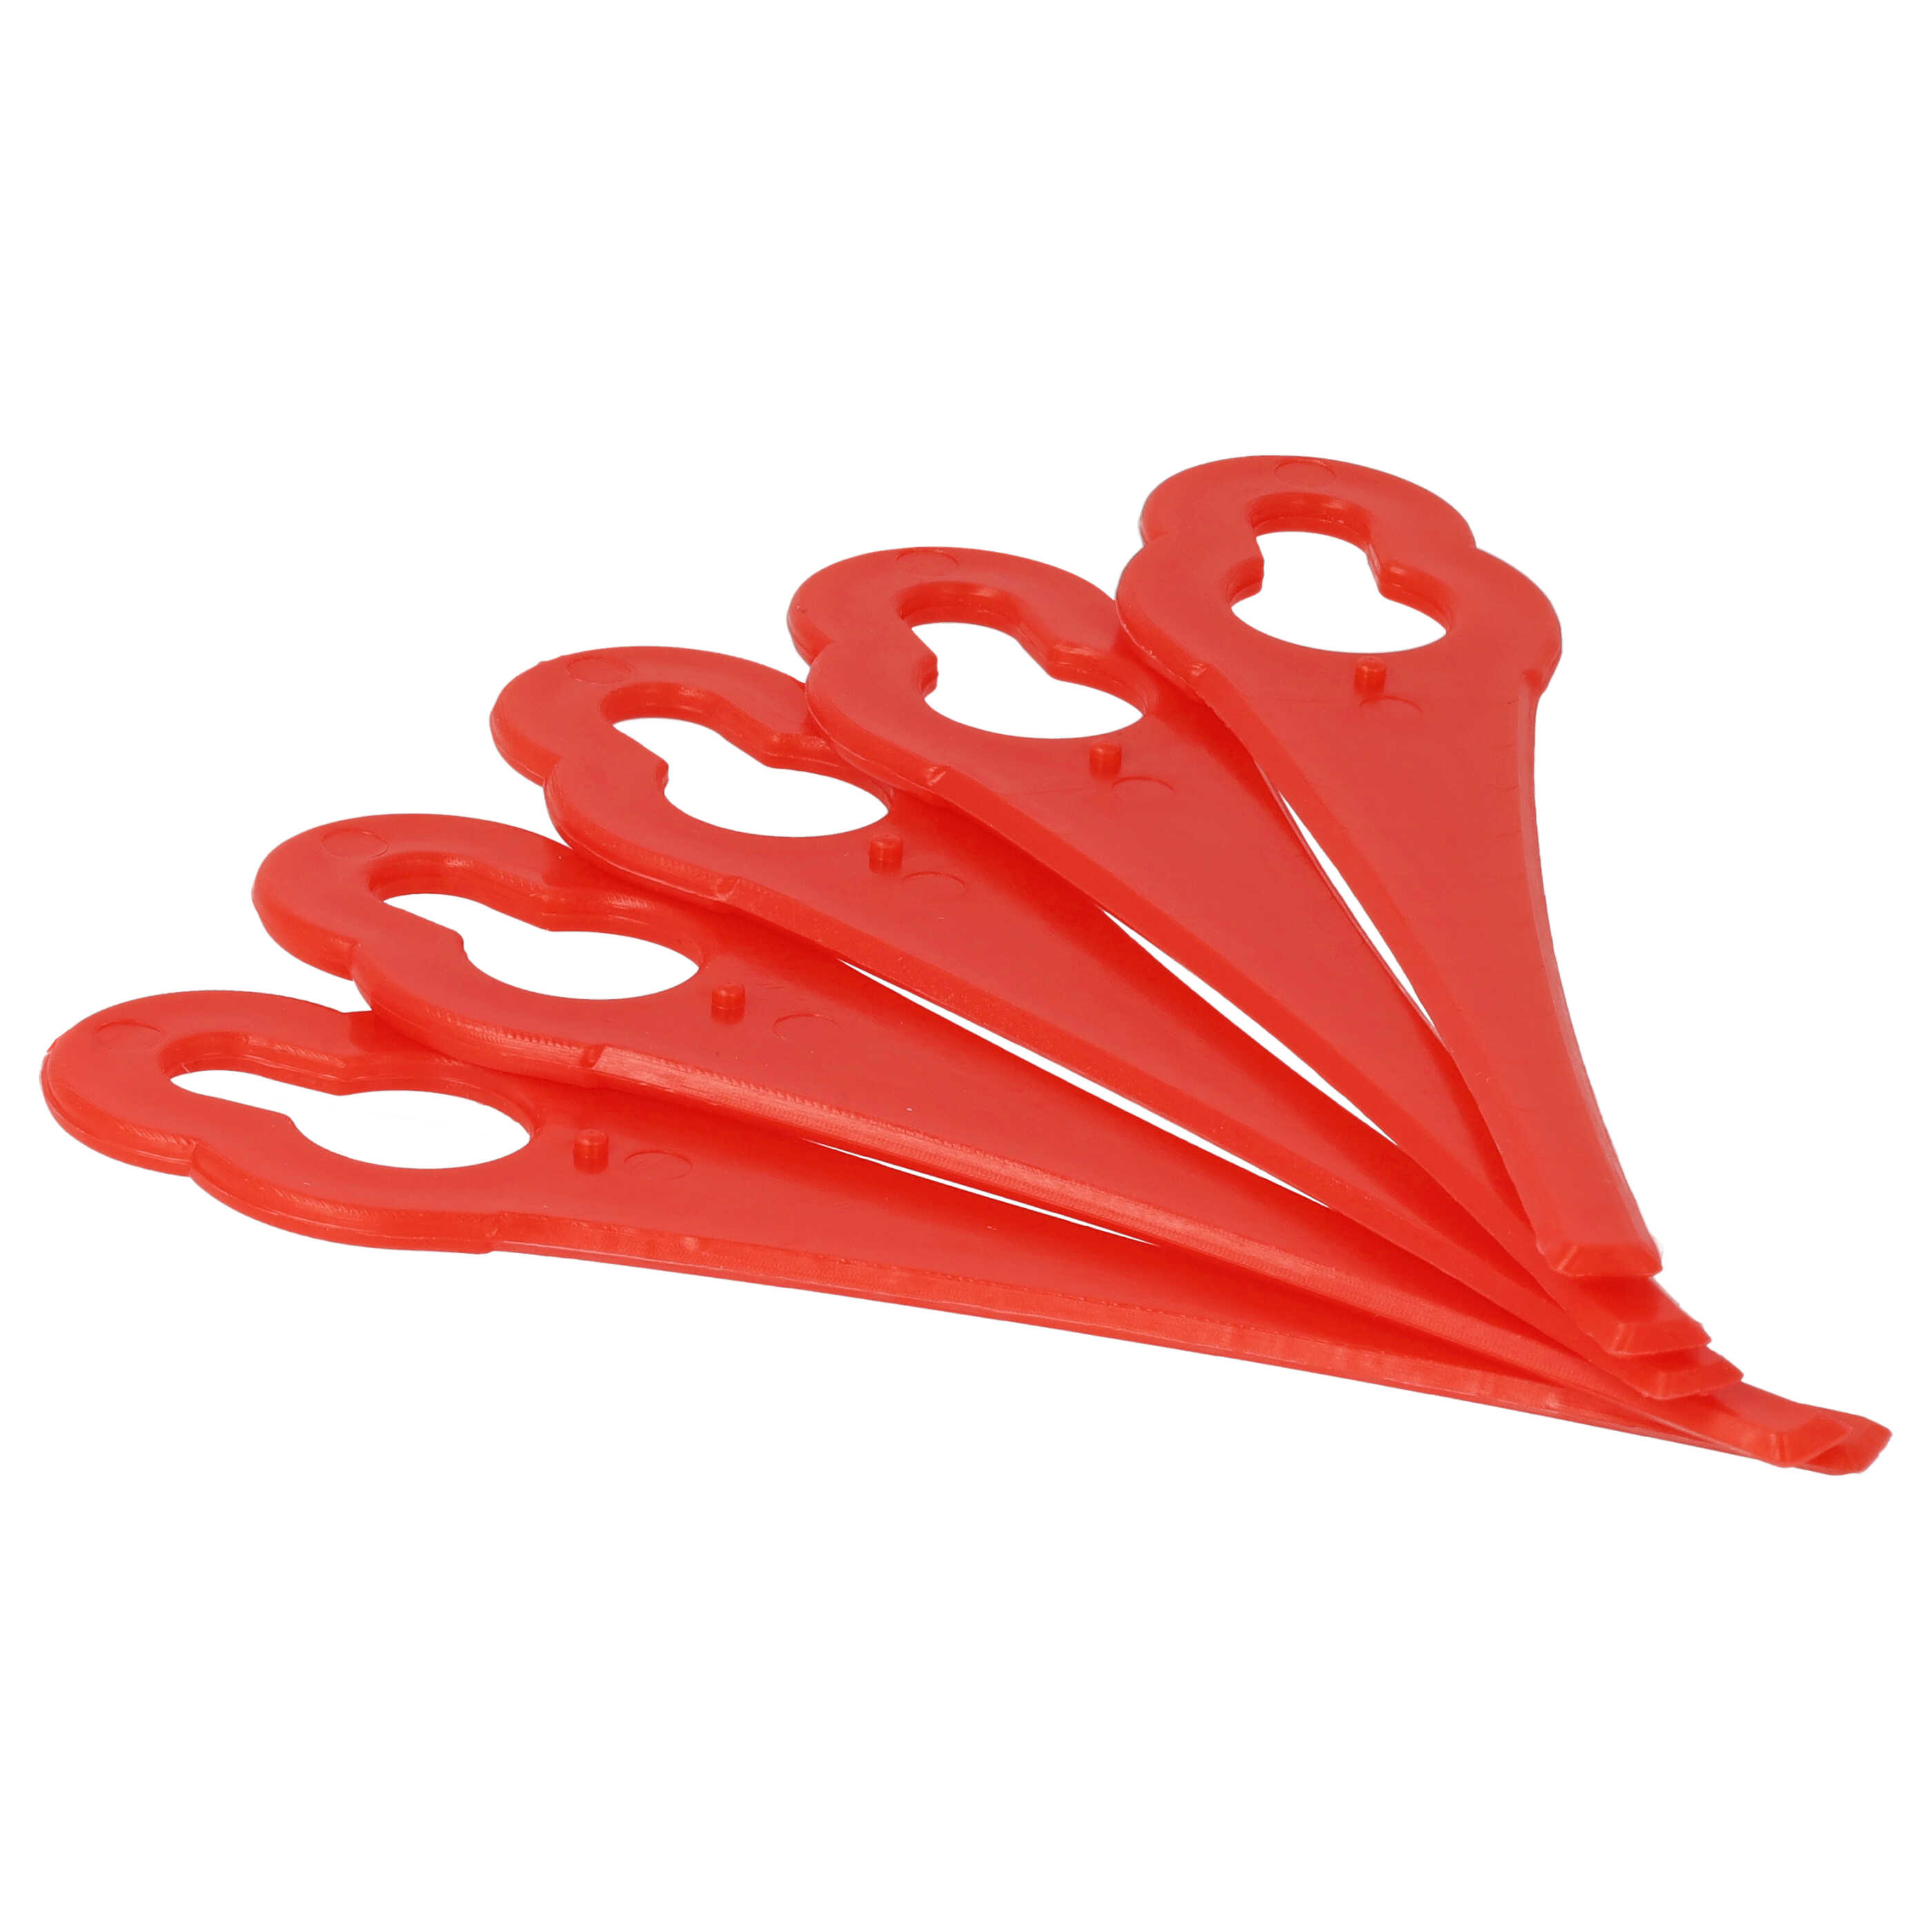 50x Exchange Blade replaces Grizzly 91094326 for Cordless Lawnmower etc. - polyamide, red